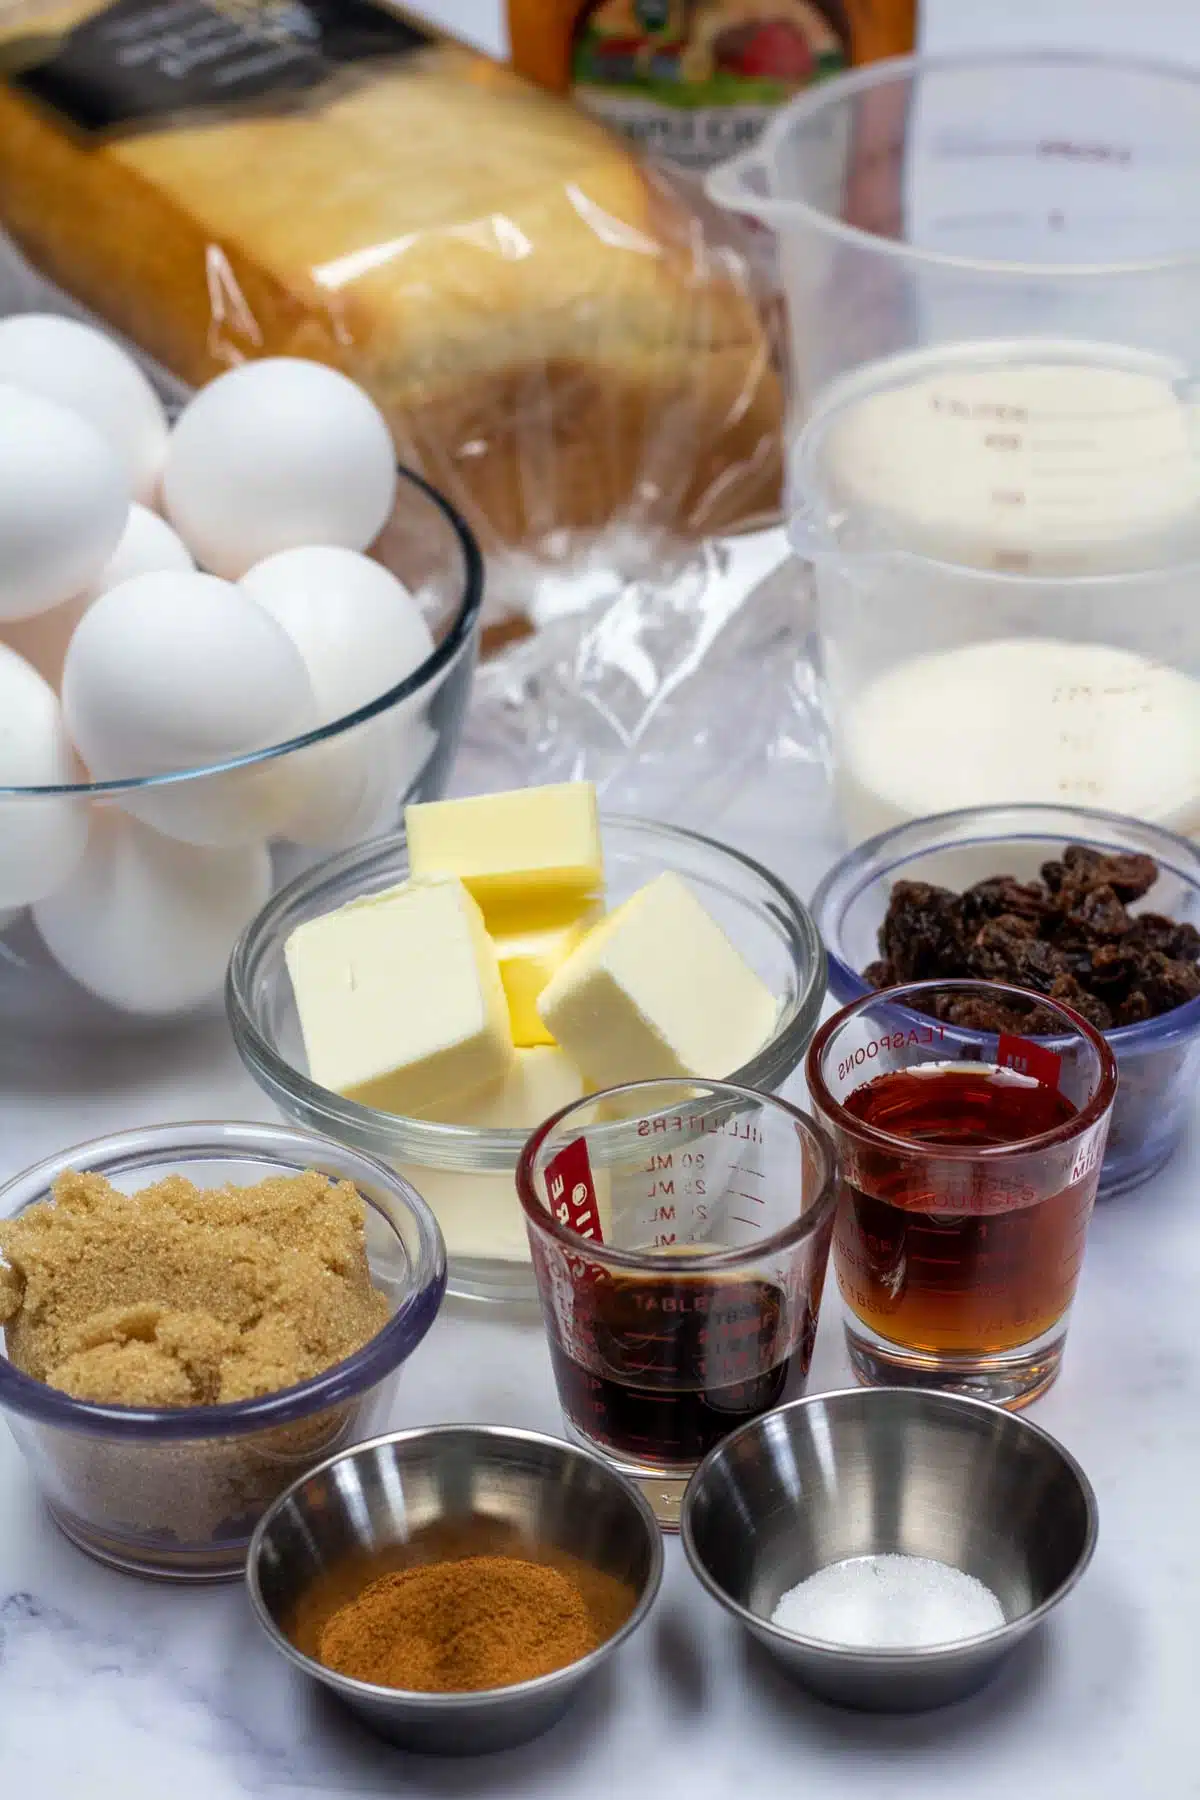 Tall image showing ingredients needed for overnight french toast bake.